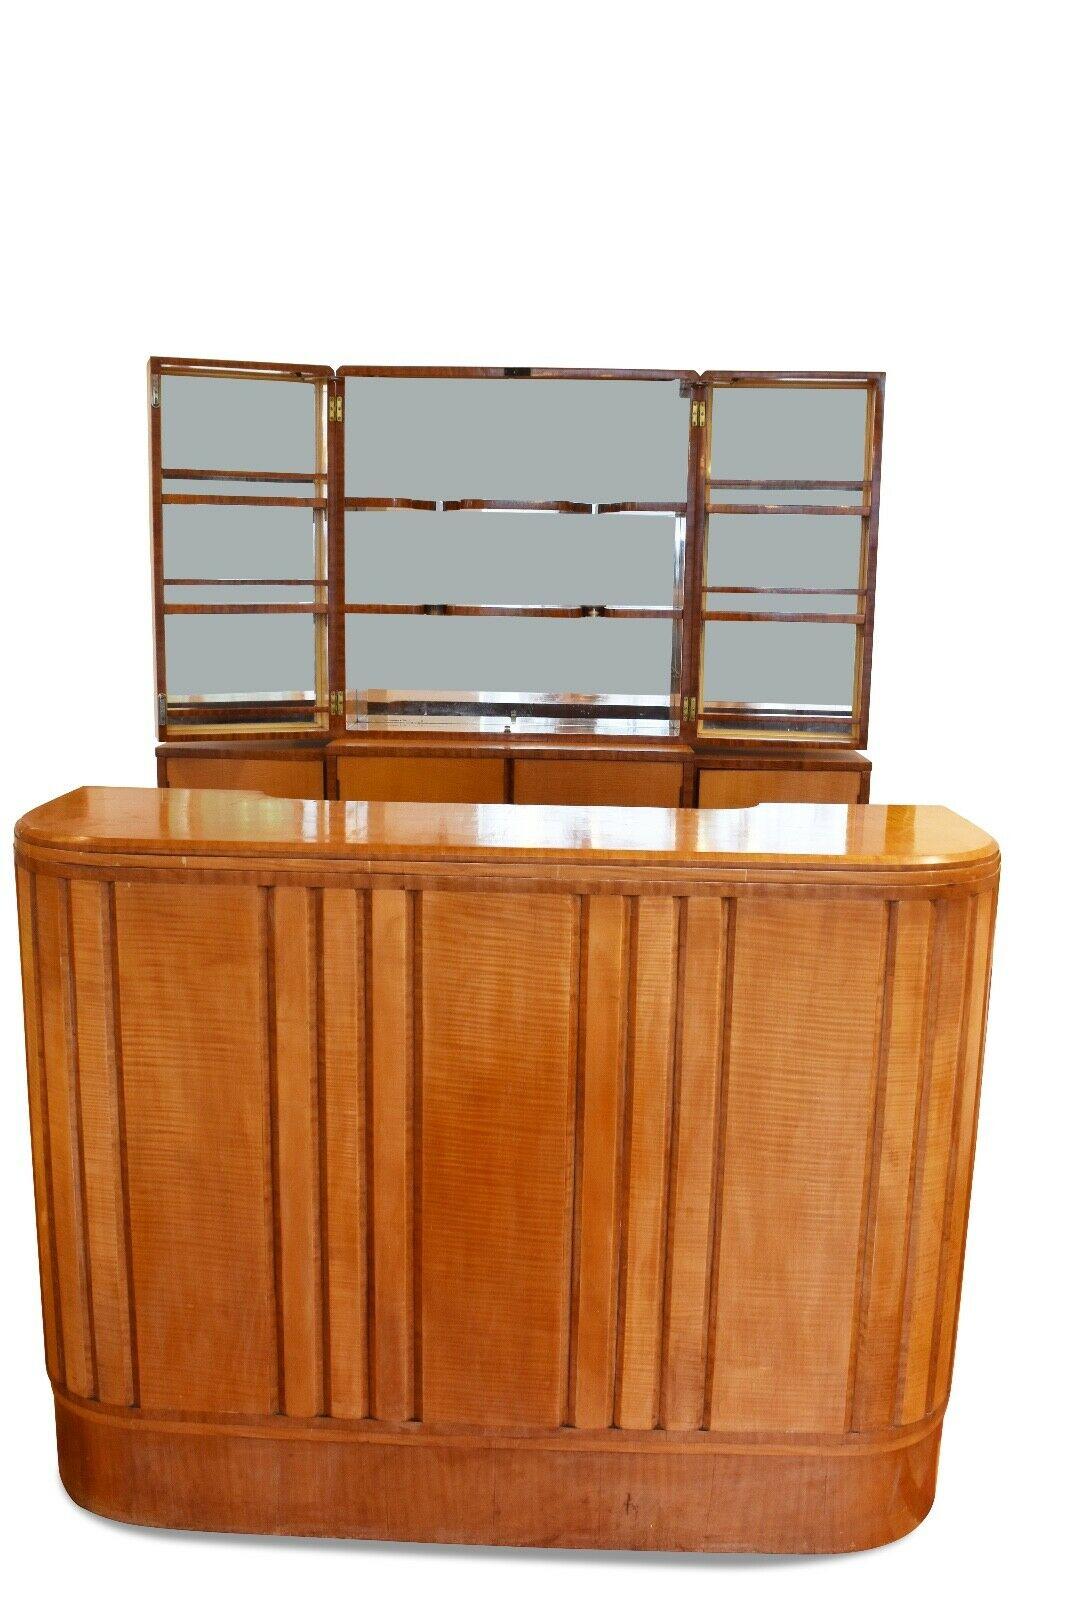 A rare original 1930's free standing bar. 

This rare and unique bar comprises of a free standing serving counter and a separate unit which is for display and storage. 

The free standing serving bar has a slight curved shaped front with ridged